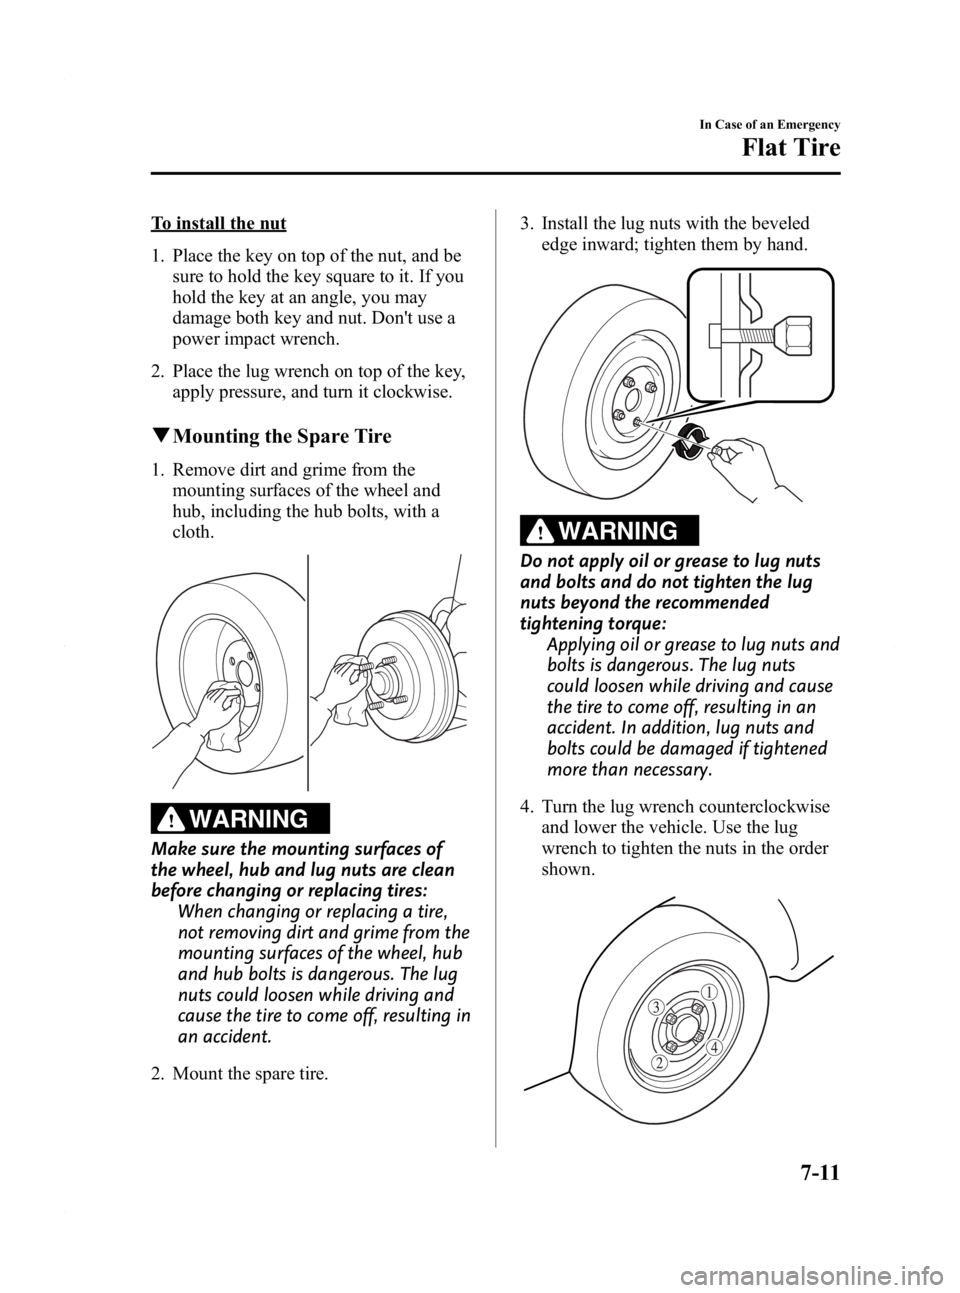 MAZDA MODEL 2 2011  Owners Manual Black plate (219,1)
To install the nut
1. Place the key on top of the nut, and besure to hold the key square to it. If you
hold the key at an angle, you may
damage both key and nut. Dont use a
power 